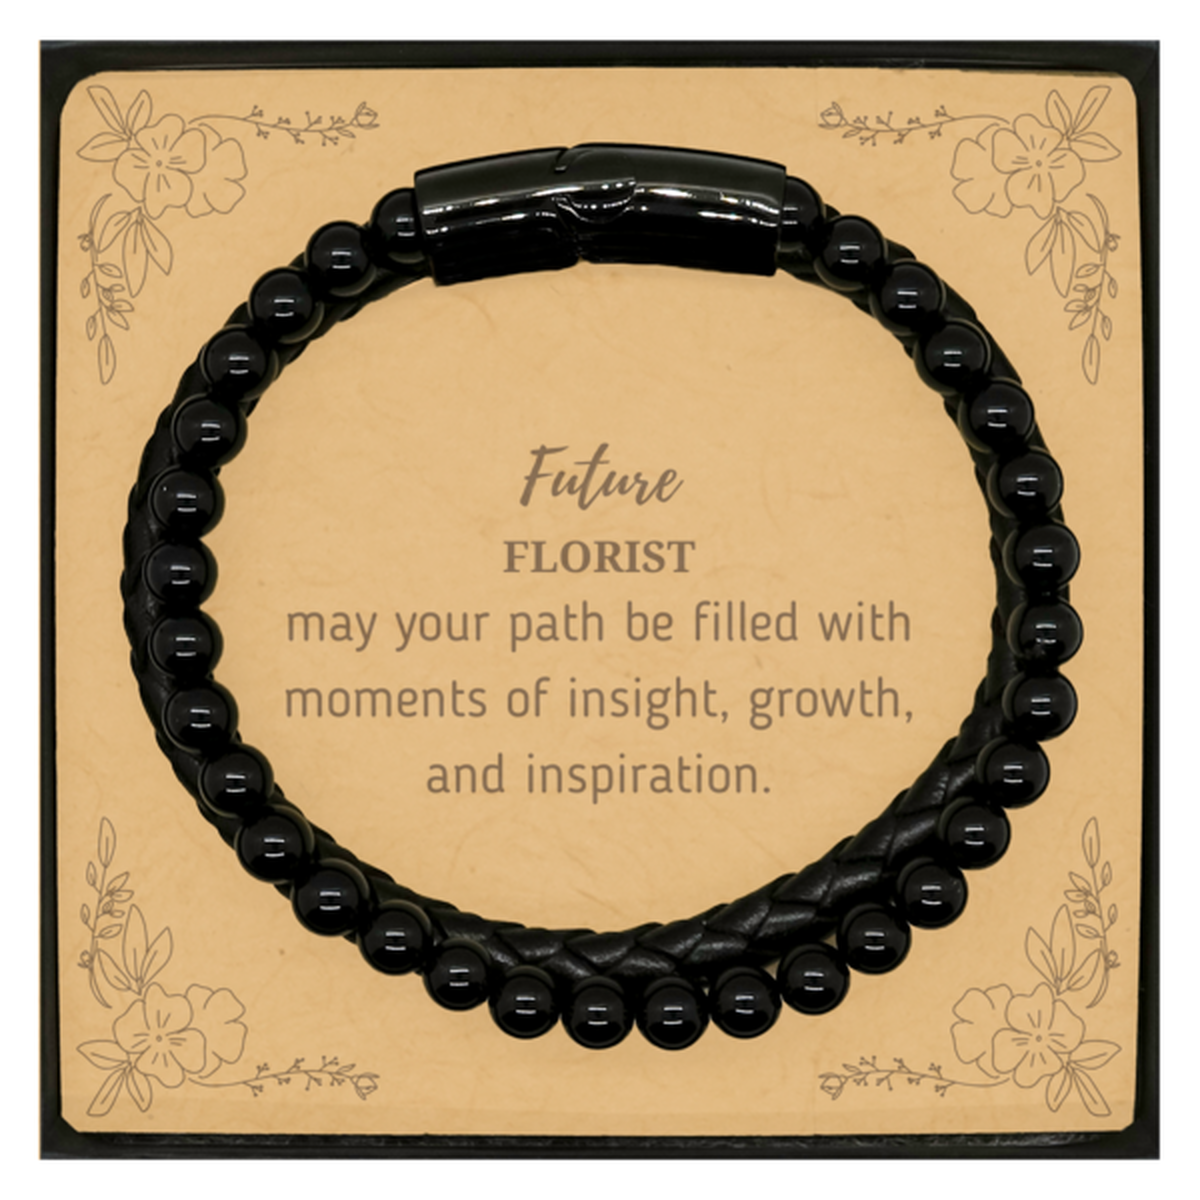 Future Florist Gifts, May your path be filled with moments of insight, Graduation Gifts for New Florist, Christmas Unique Stone Leather Bracelets For Men, Women, Friends